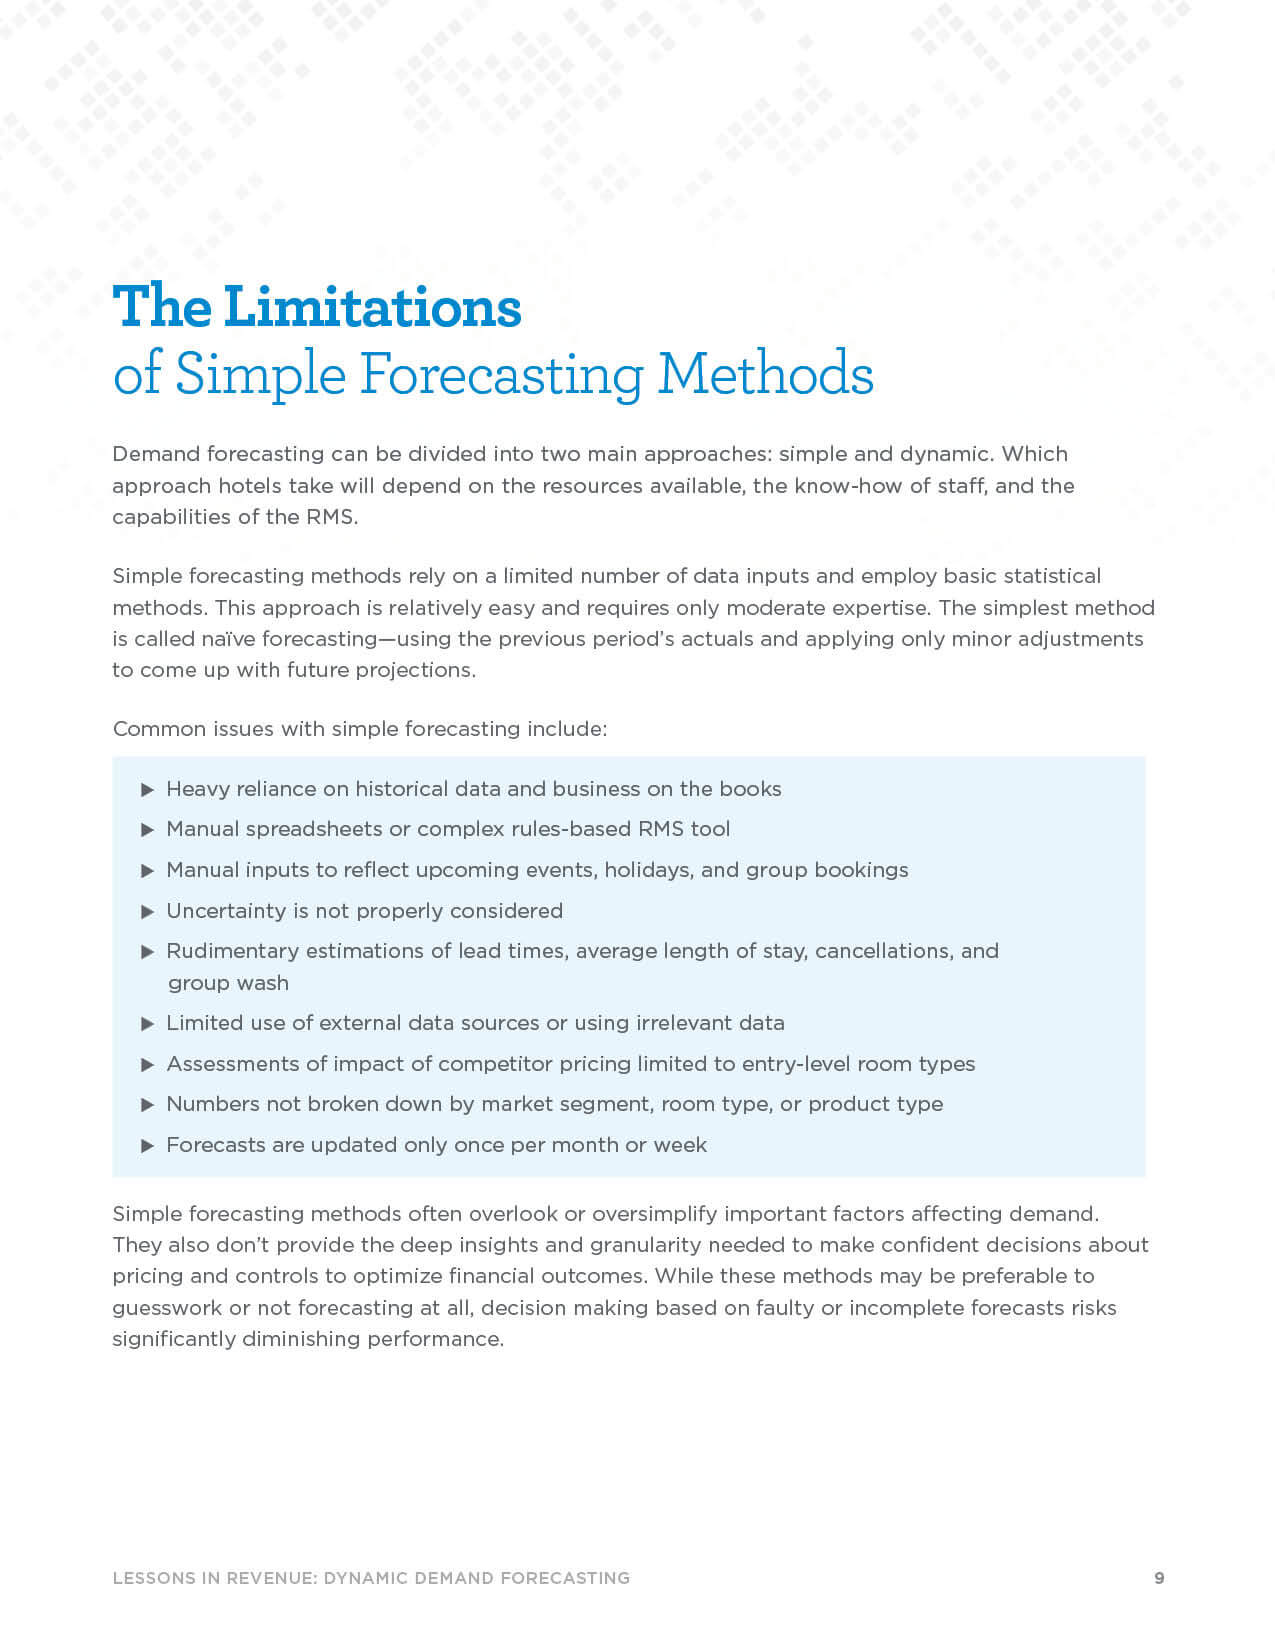 Page 9 - The Limitations of Simple Forecasting Methods